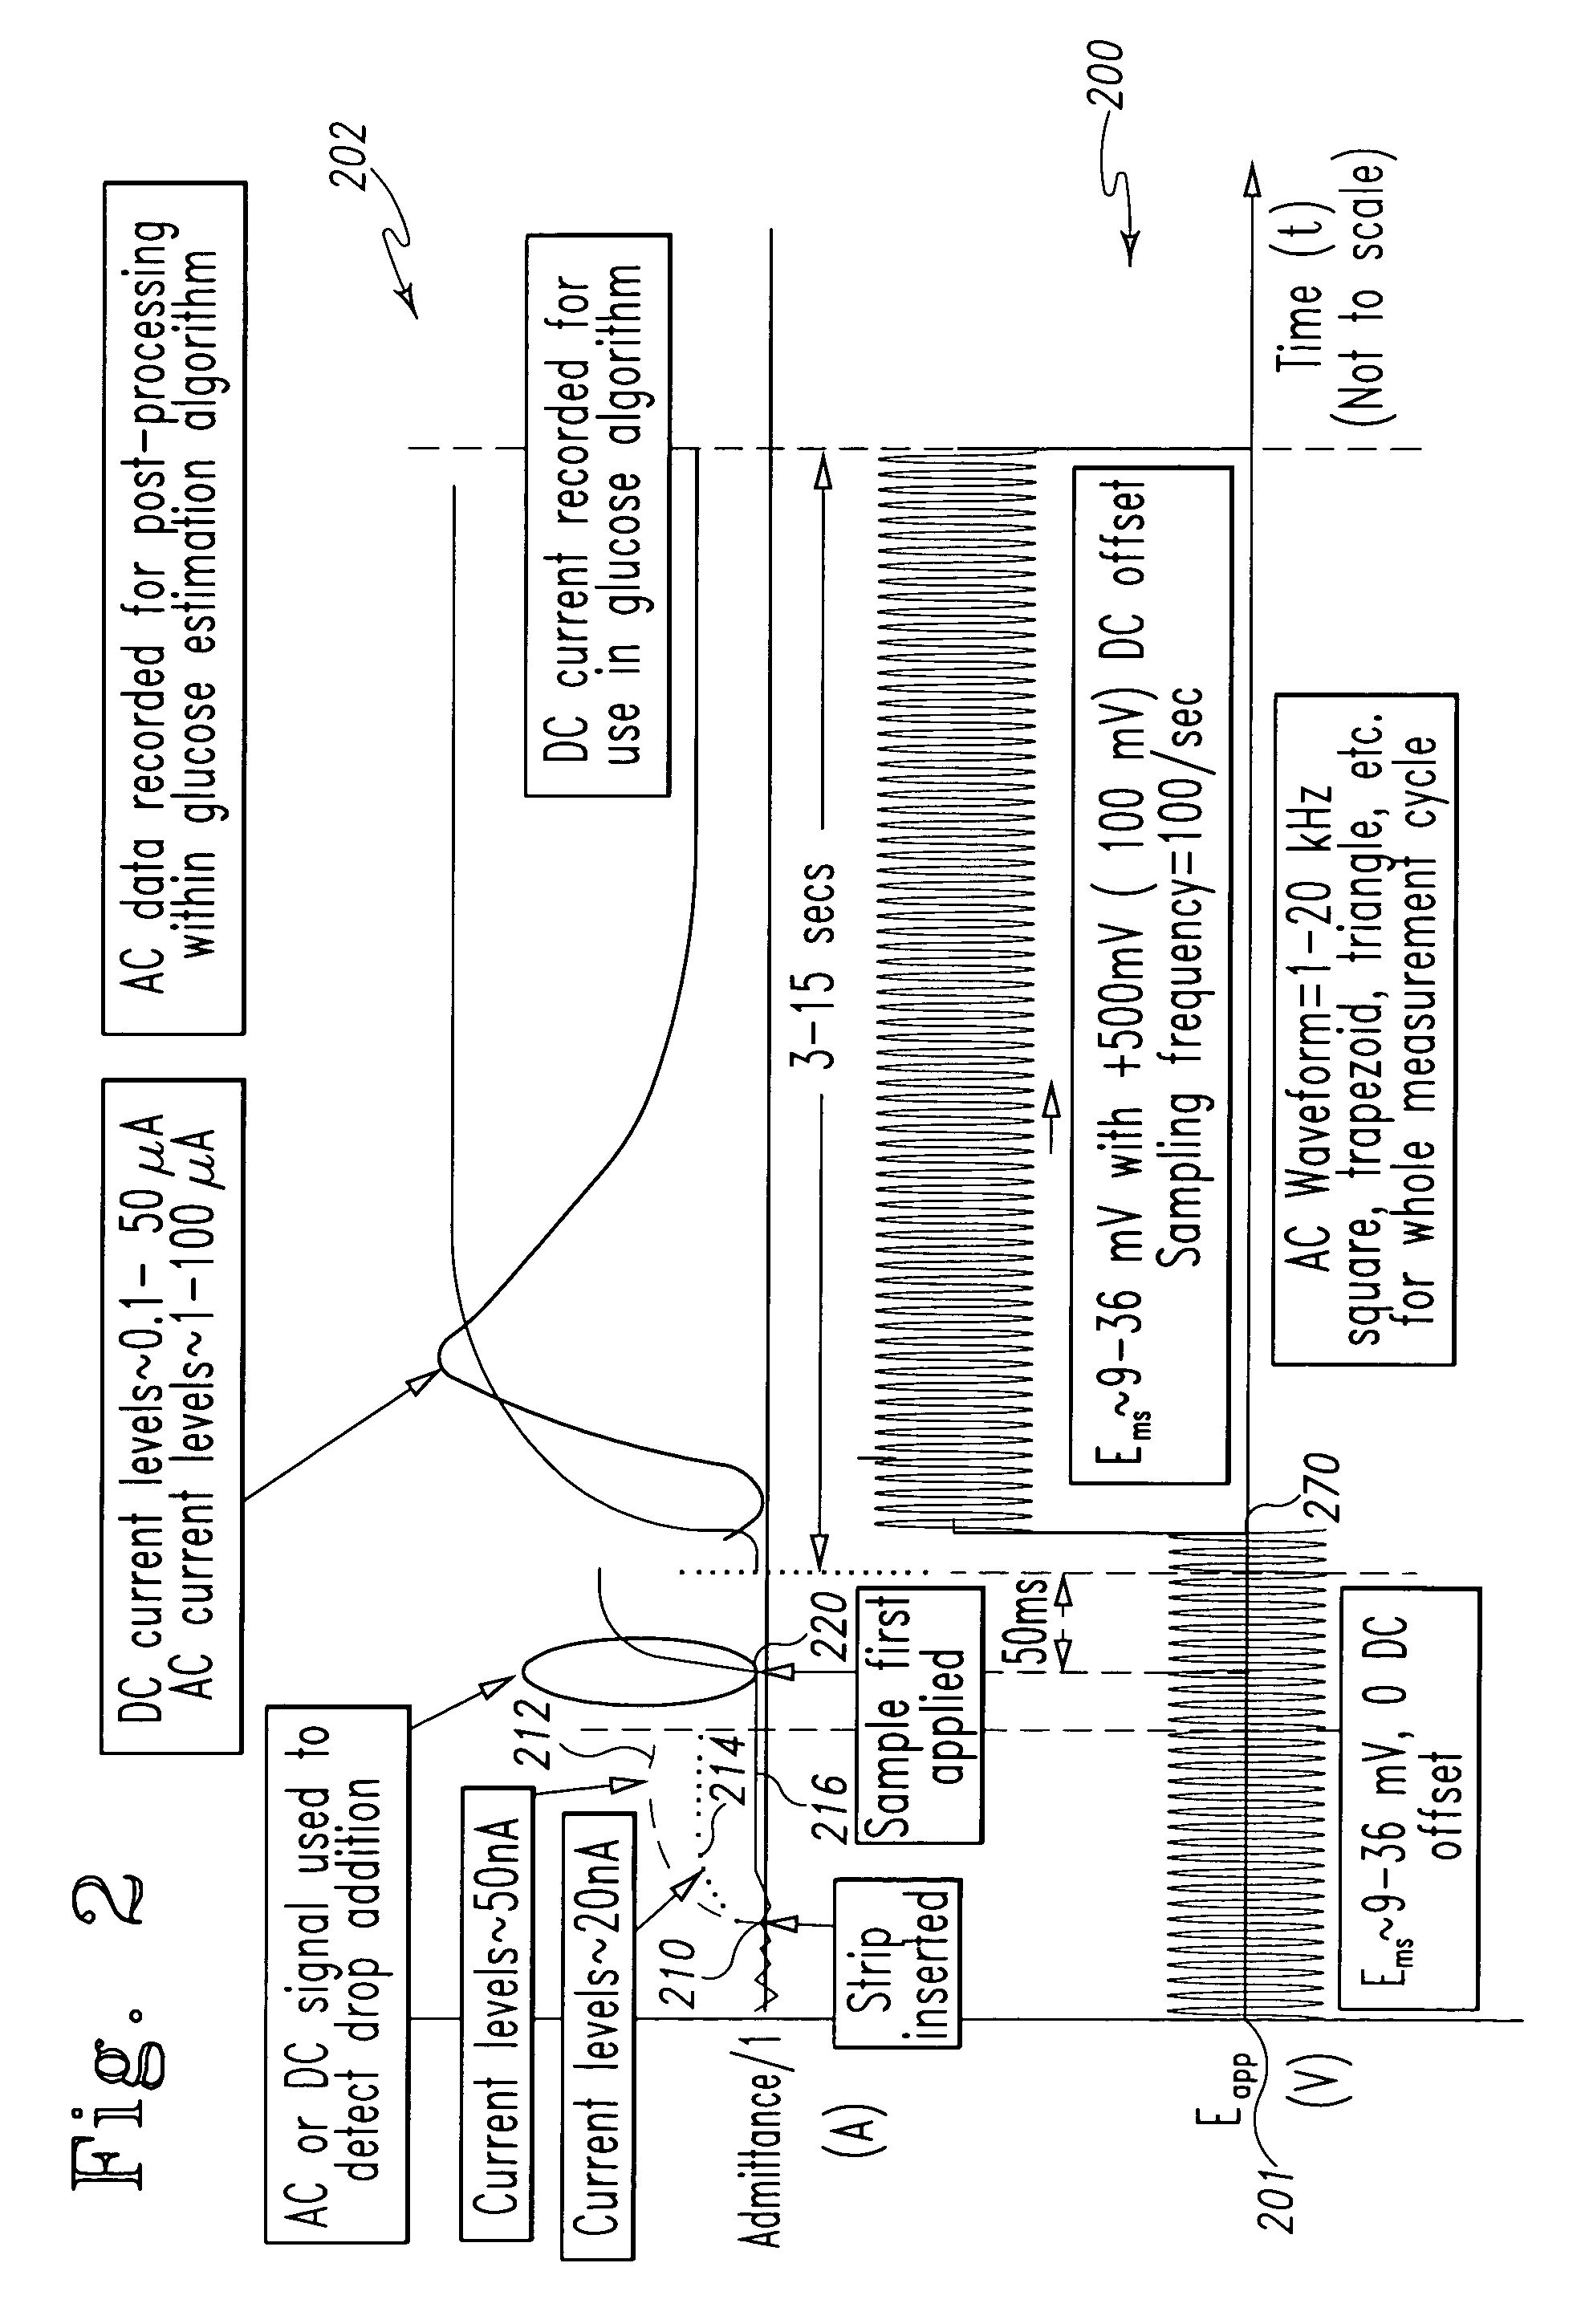 System and method for analyte measurement employing maximum dosing time delay